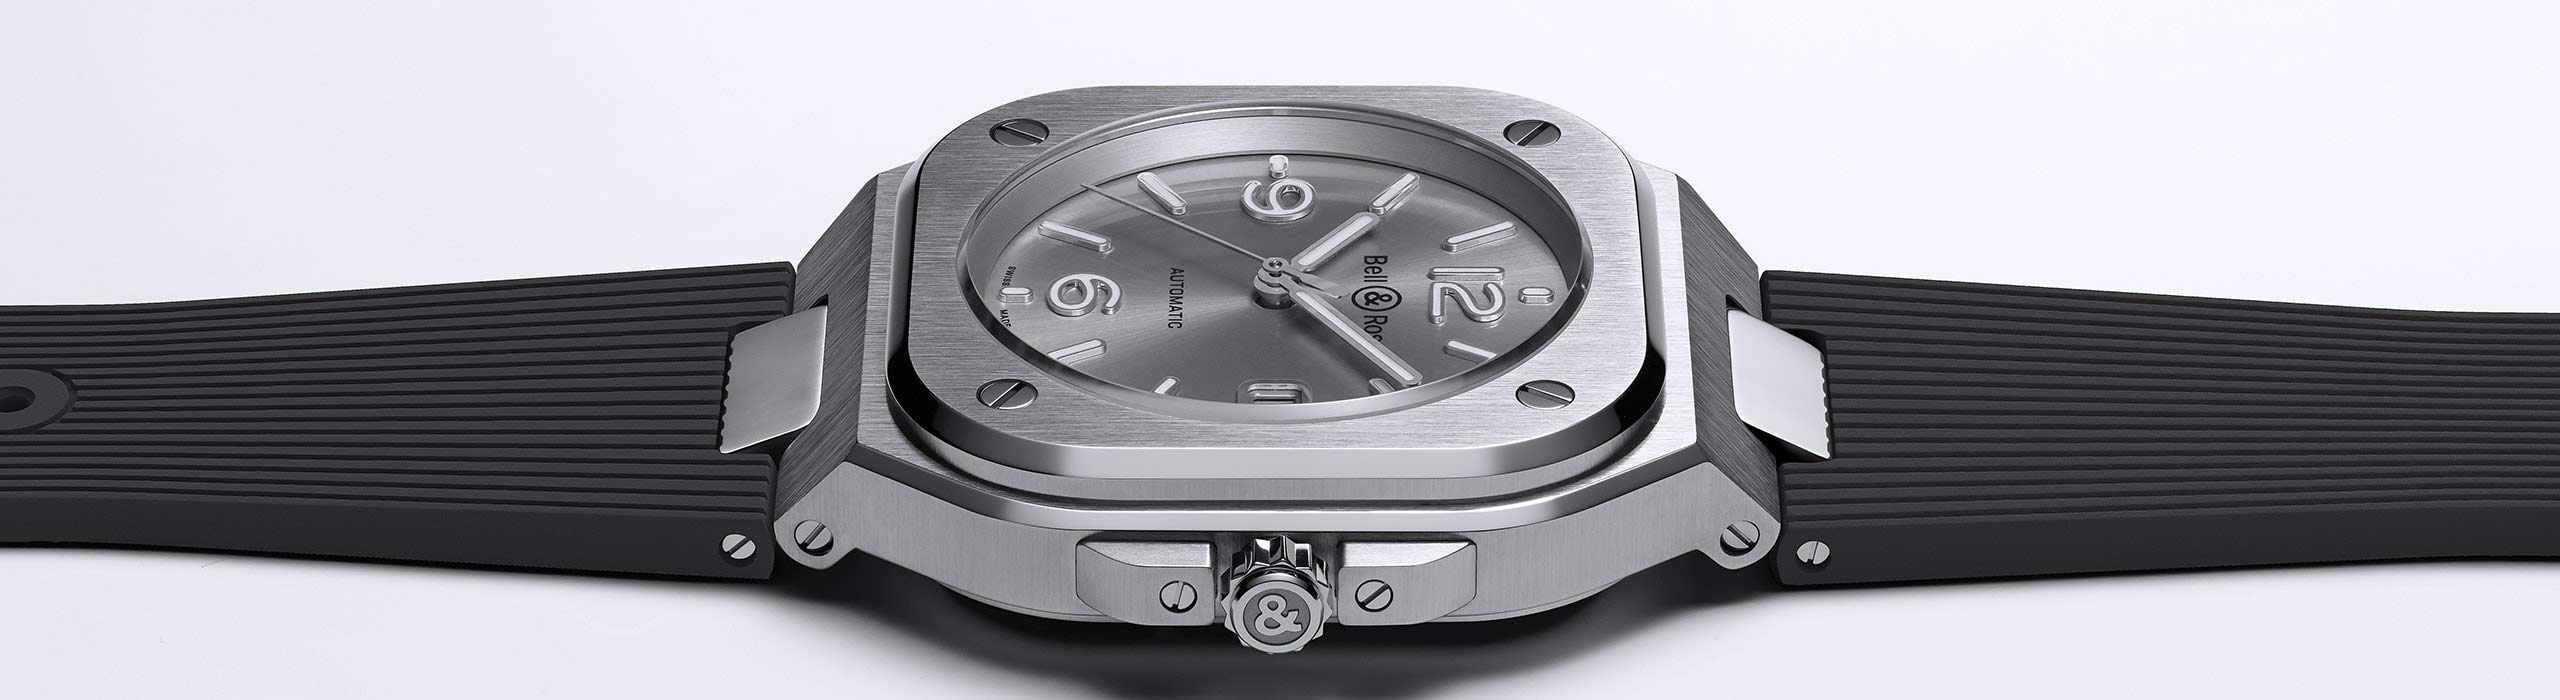 Bell & Ross BR 05 Silver Dial Steel Automatic Watch